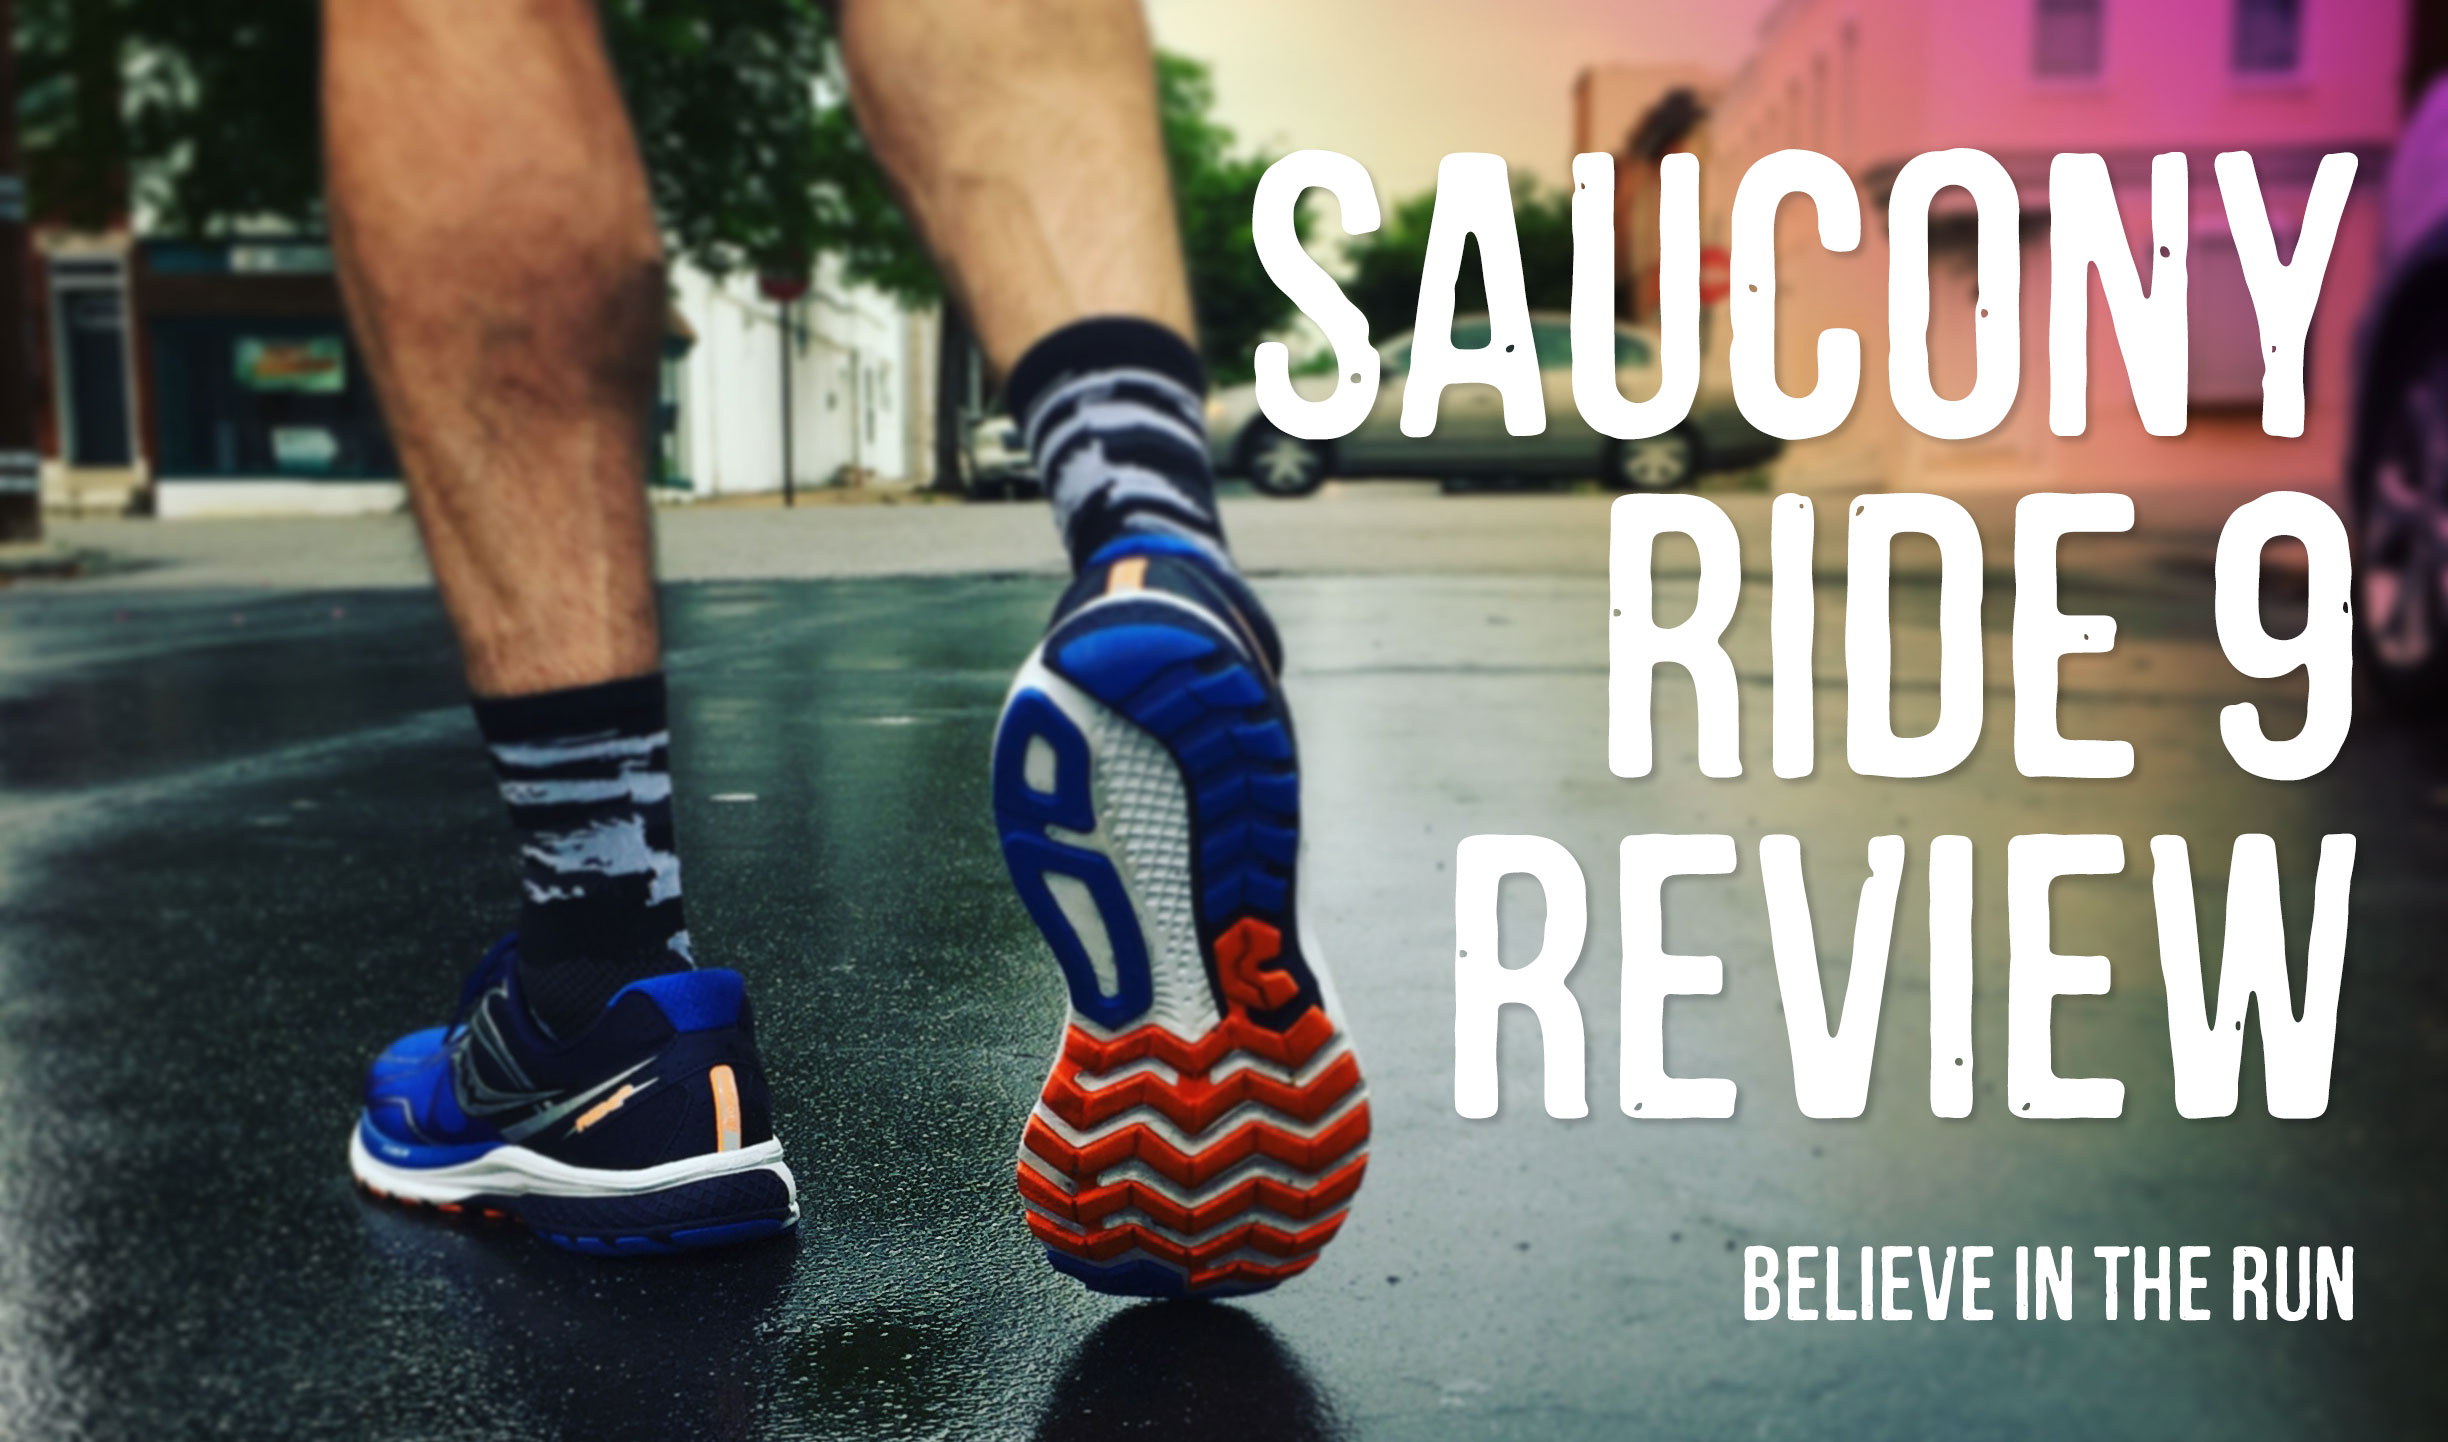 Saucony Ride 9 Review » Believe in the Run